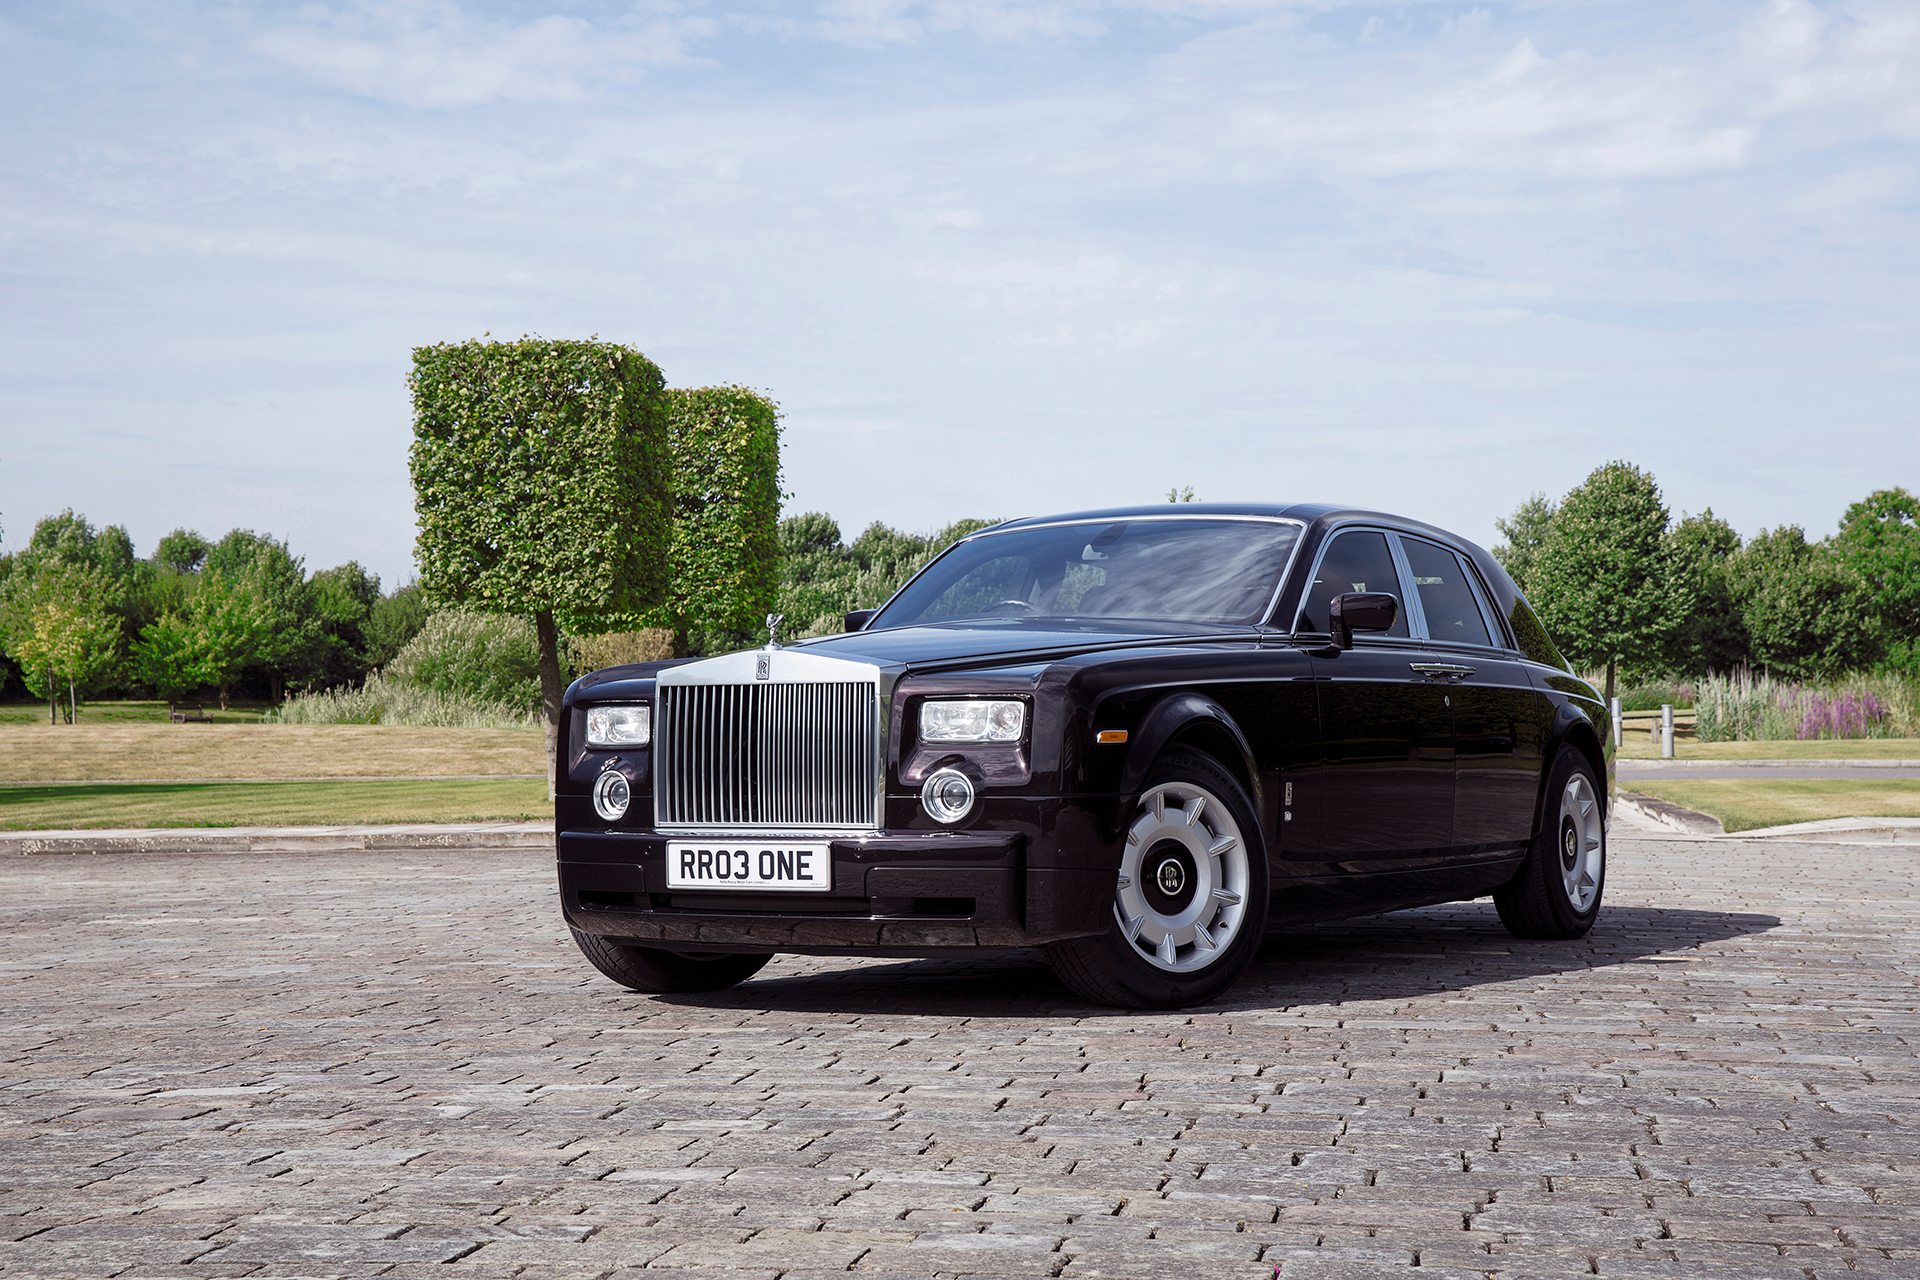 RollsRoyce once used by the QUEEN is set to sell for 2 MILLION   Expresscouk